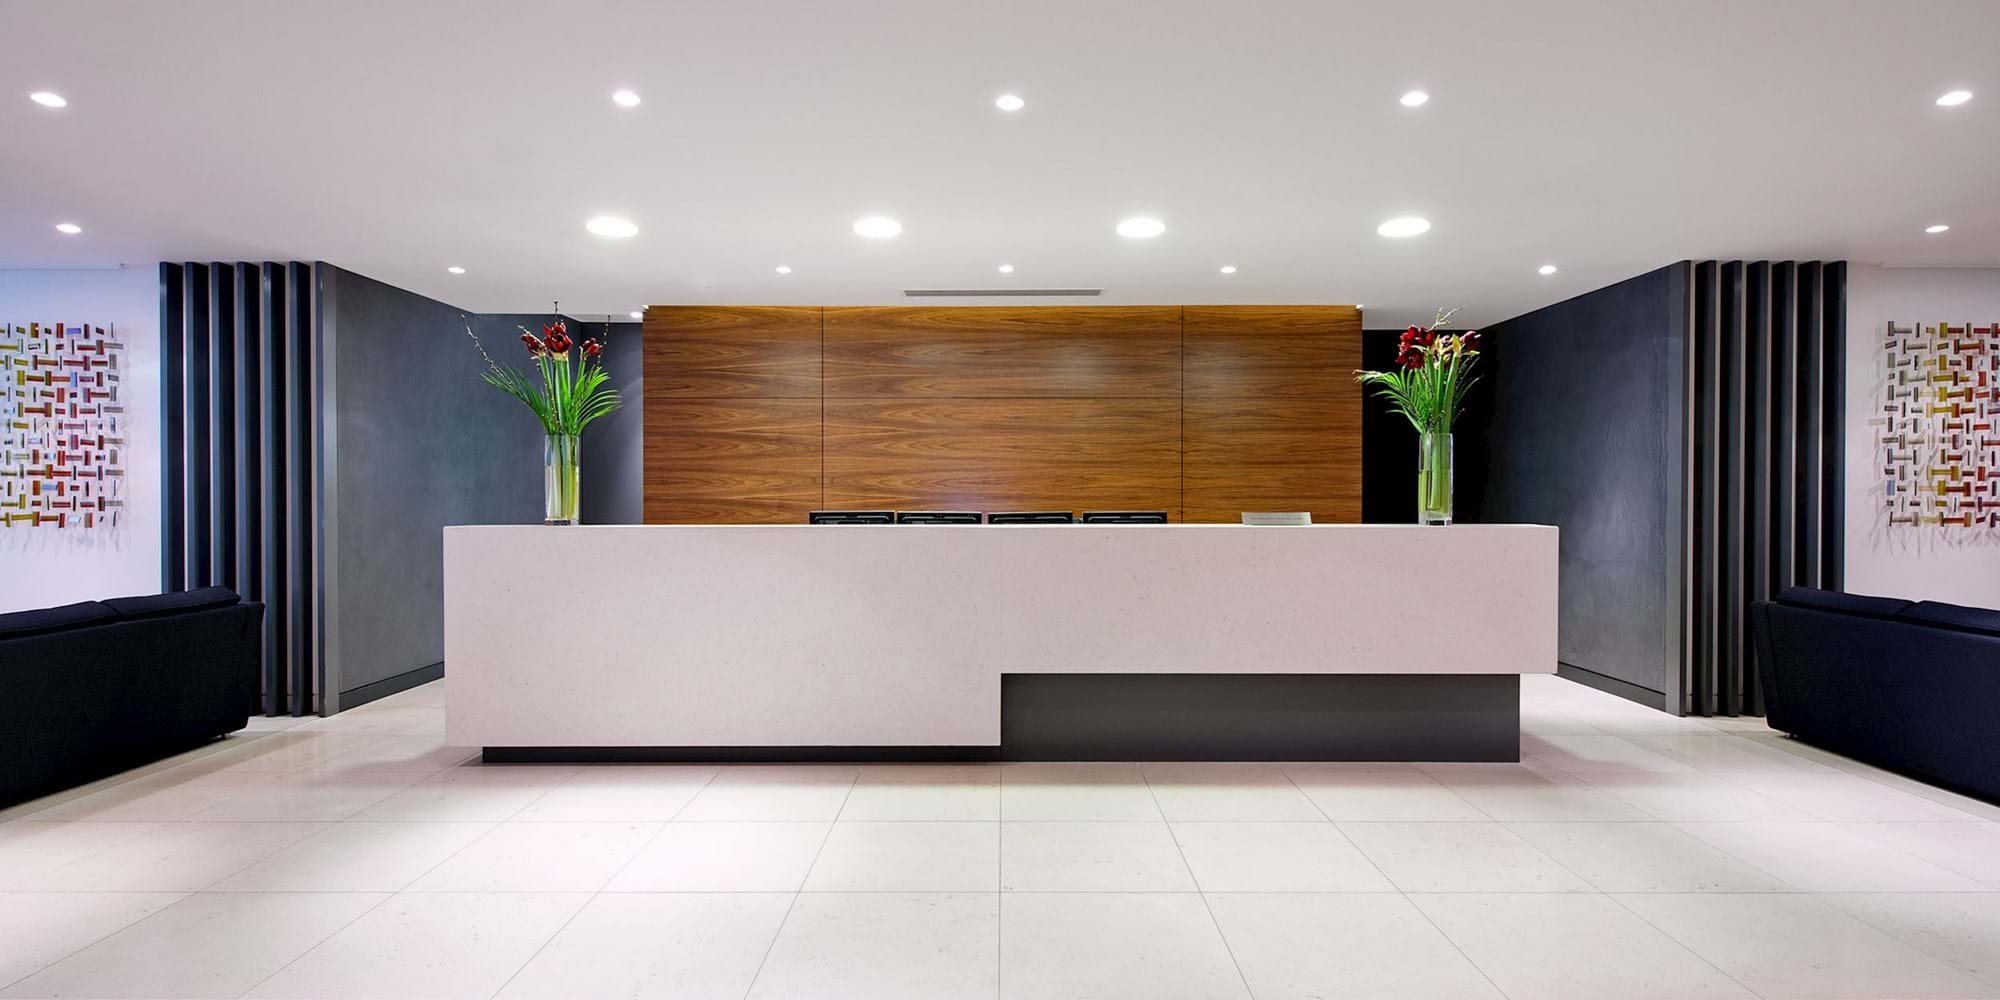 Modus Workspace office design, fit out and refurbishment - GIP - Reception - GIP 01_logo_out_highres_sRGB.jpg